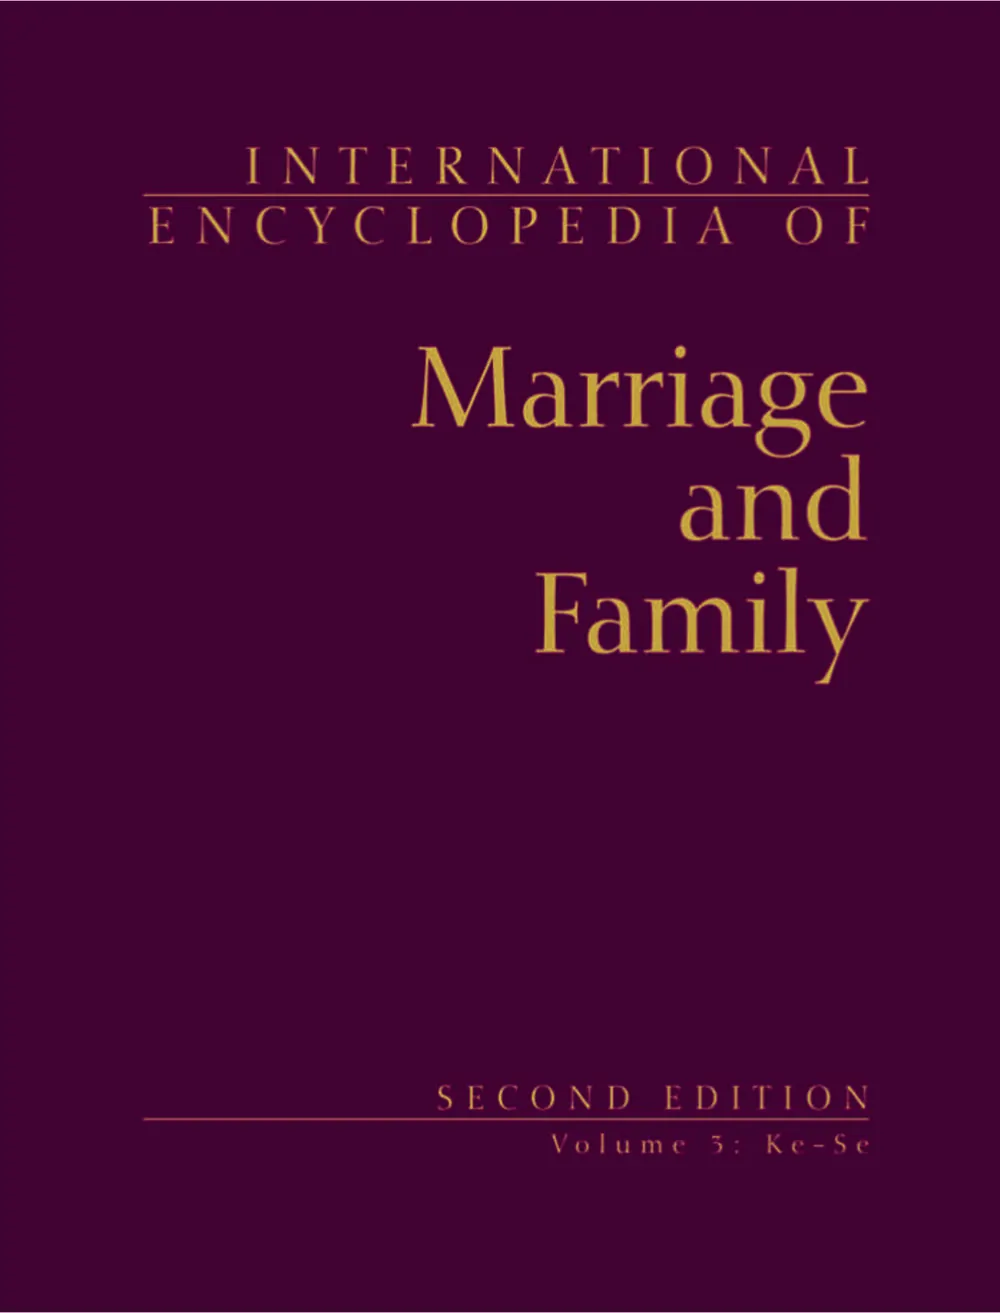 International Encyclopedia of Marriage and Family - Volume 3